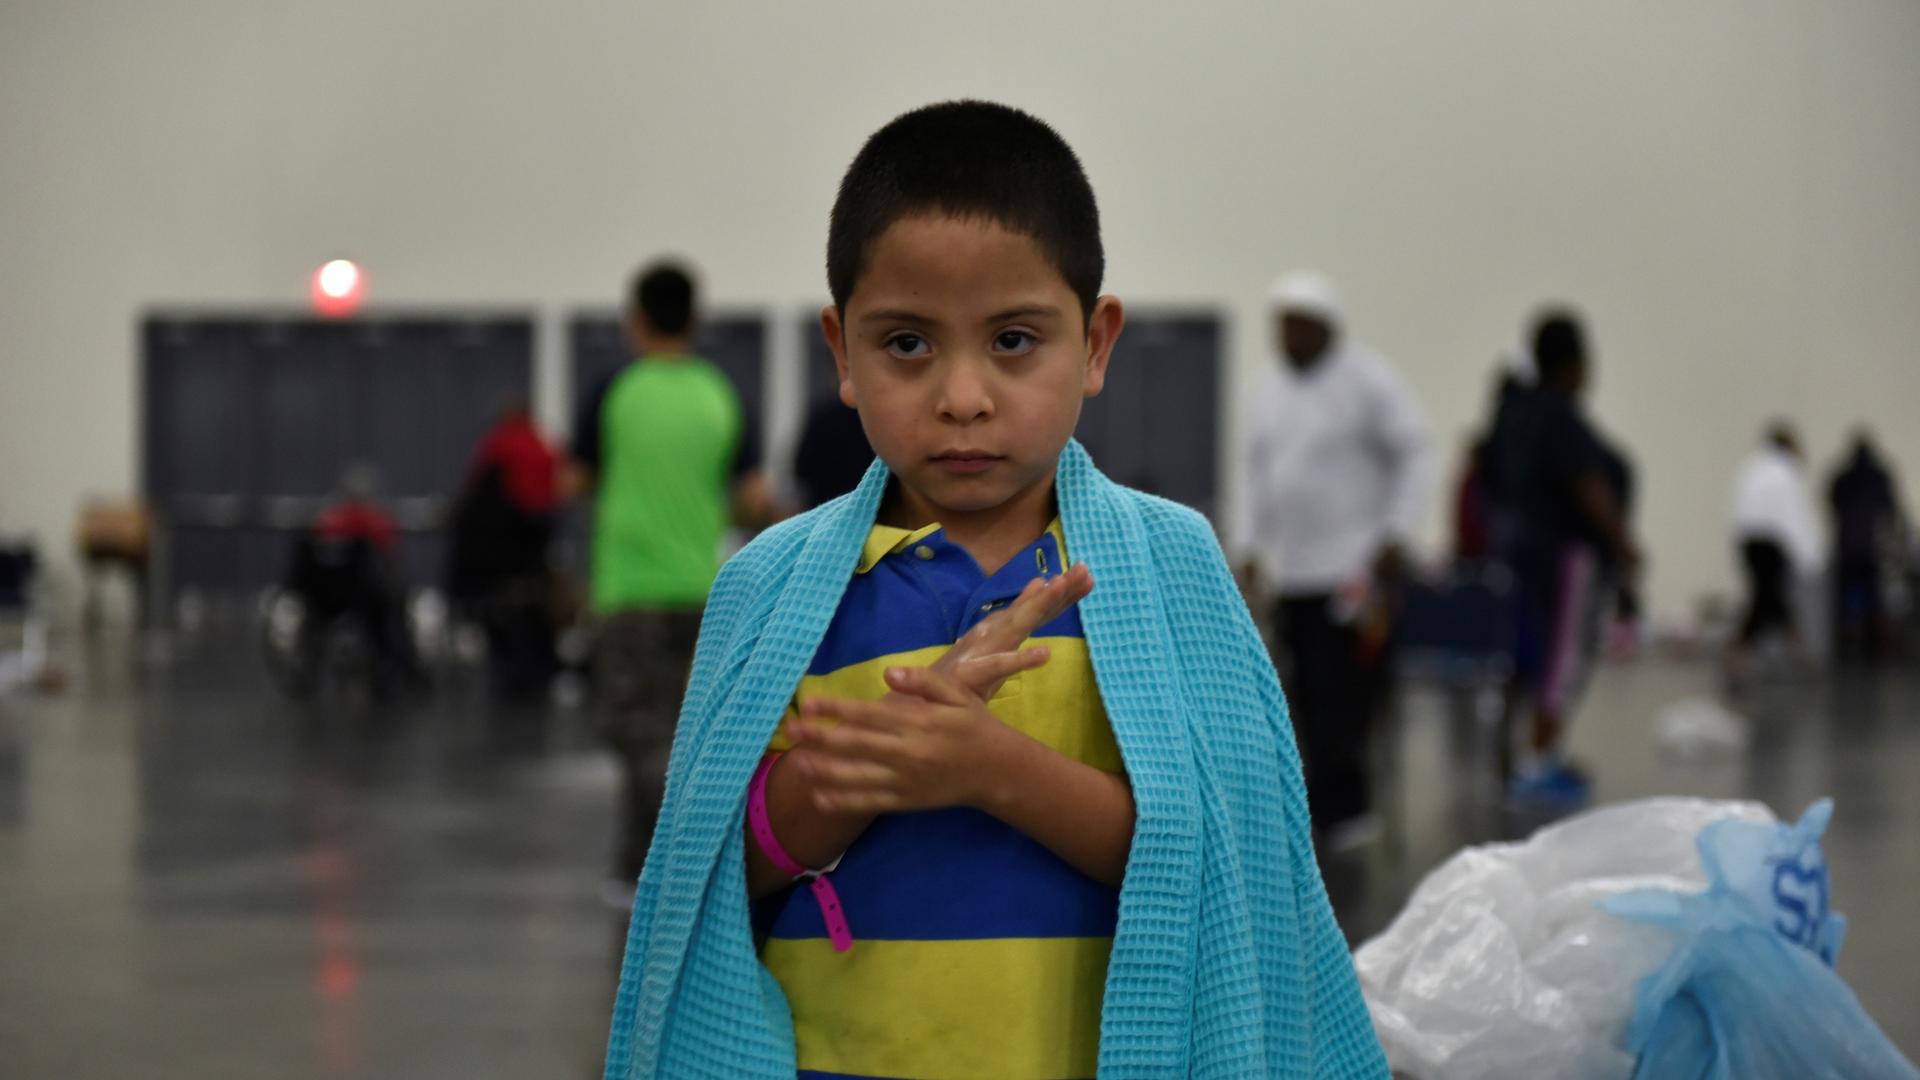 Evacuee Pete Quintana Jr. is wrapped in a blanket at the George R. Brown Convention Center after Hurricane Harvey in Houston, Texas, Aug. 28, 2017.